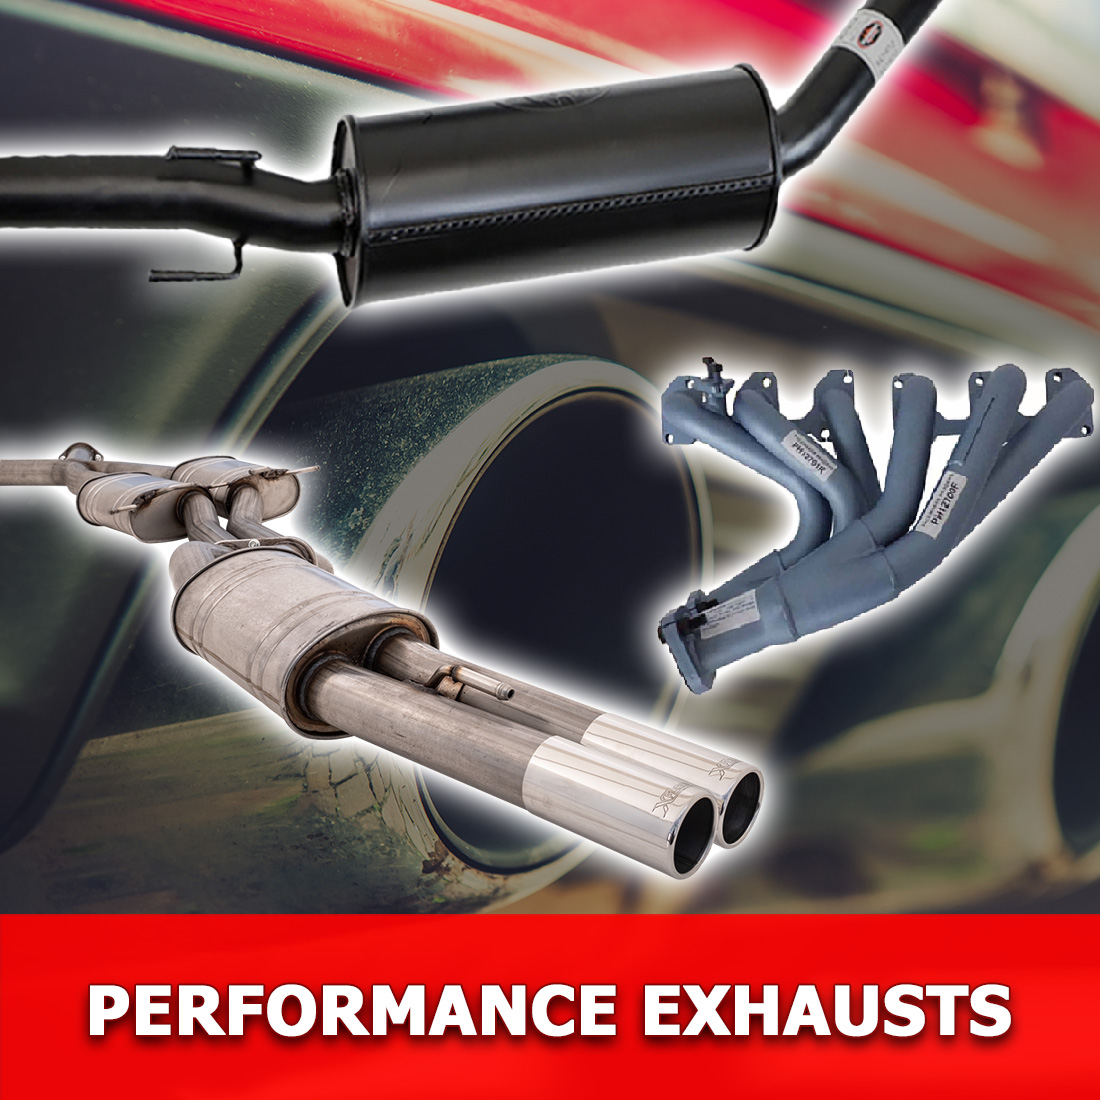 Performance Exhausts at Playtime Auto Parts.